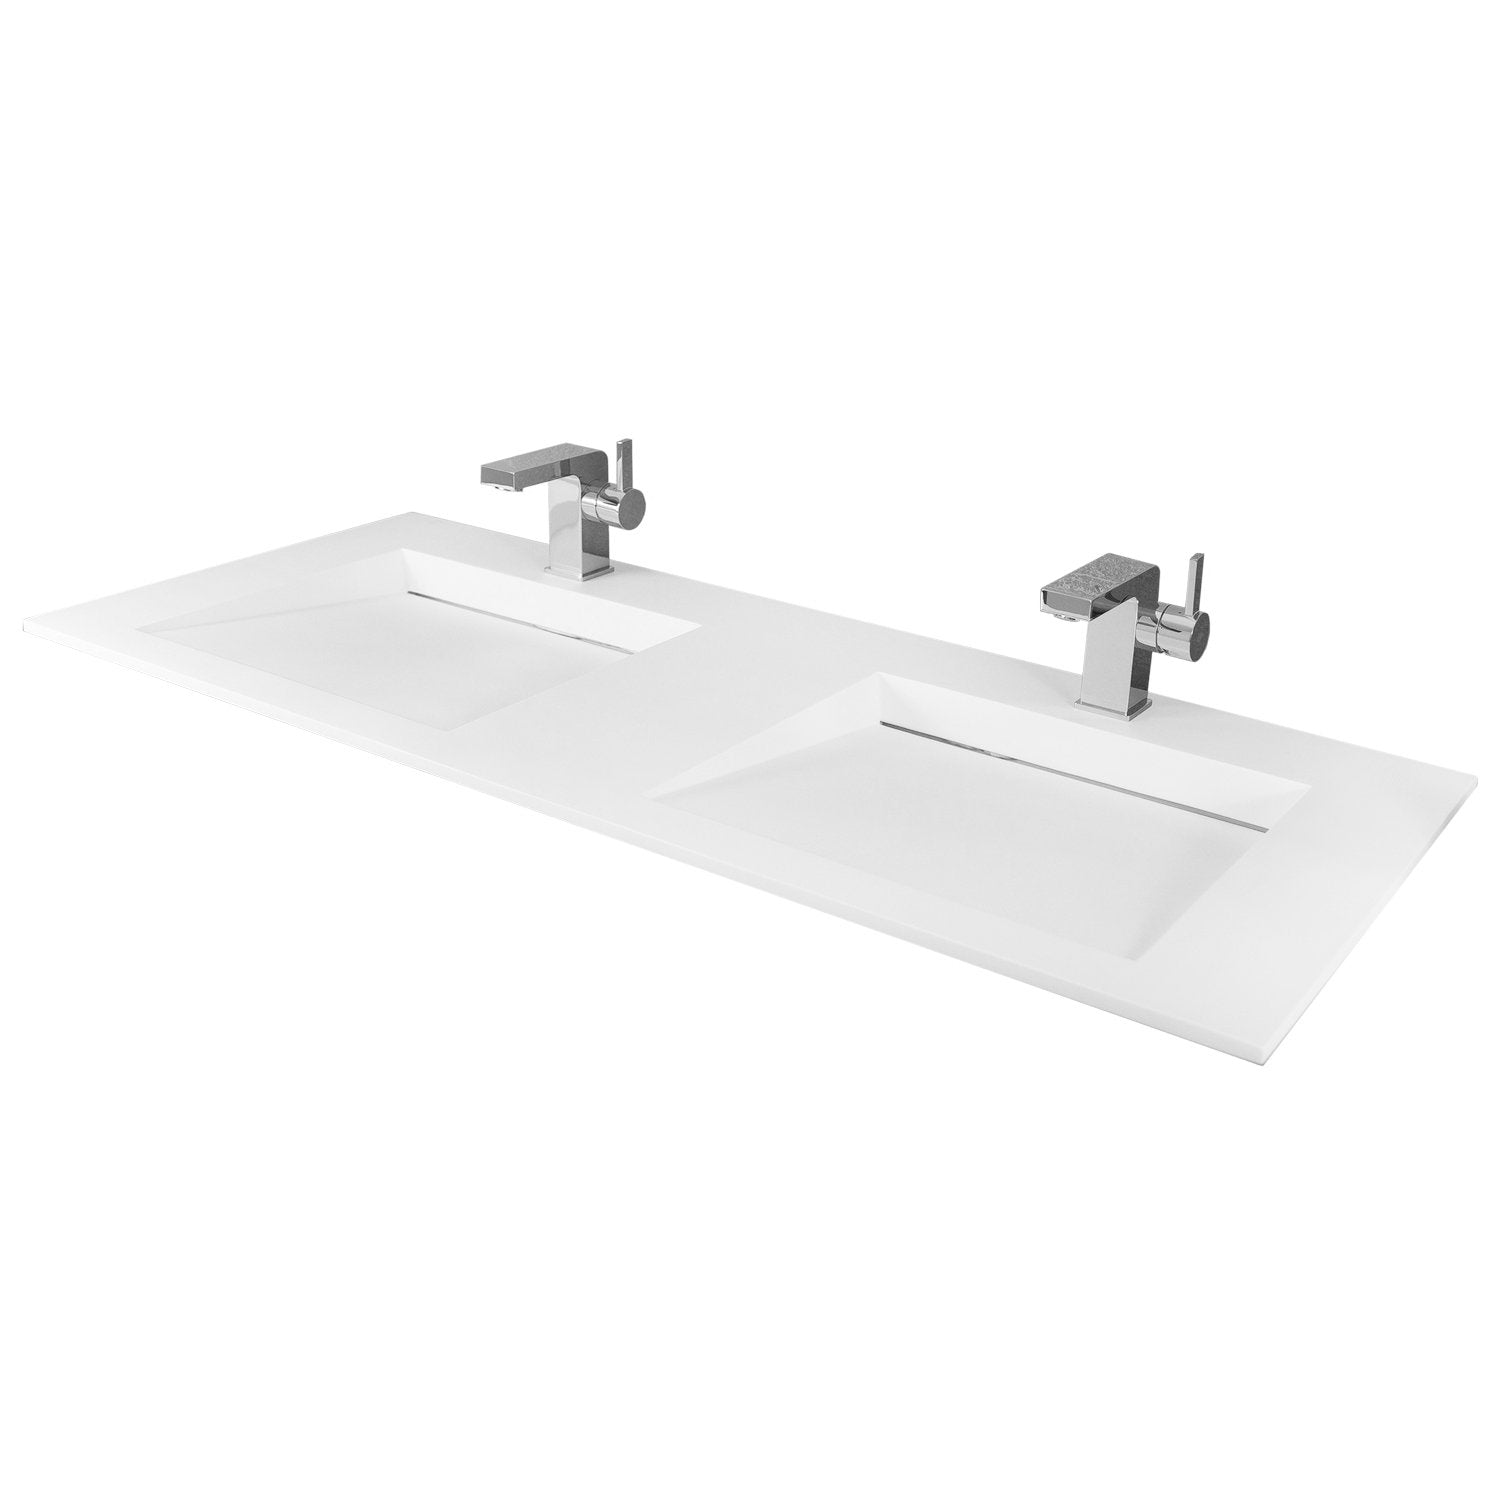 DAX Solid Surface Rectangle Double Bowl Top Mount Bathroom Sink, White Matte Finish,  47-1/4 x 19-2/3 x 3-3/4 Inches (DAX-AB-1332)